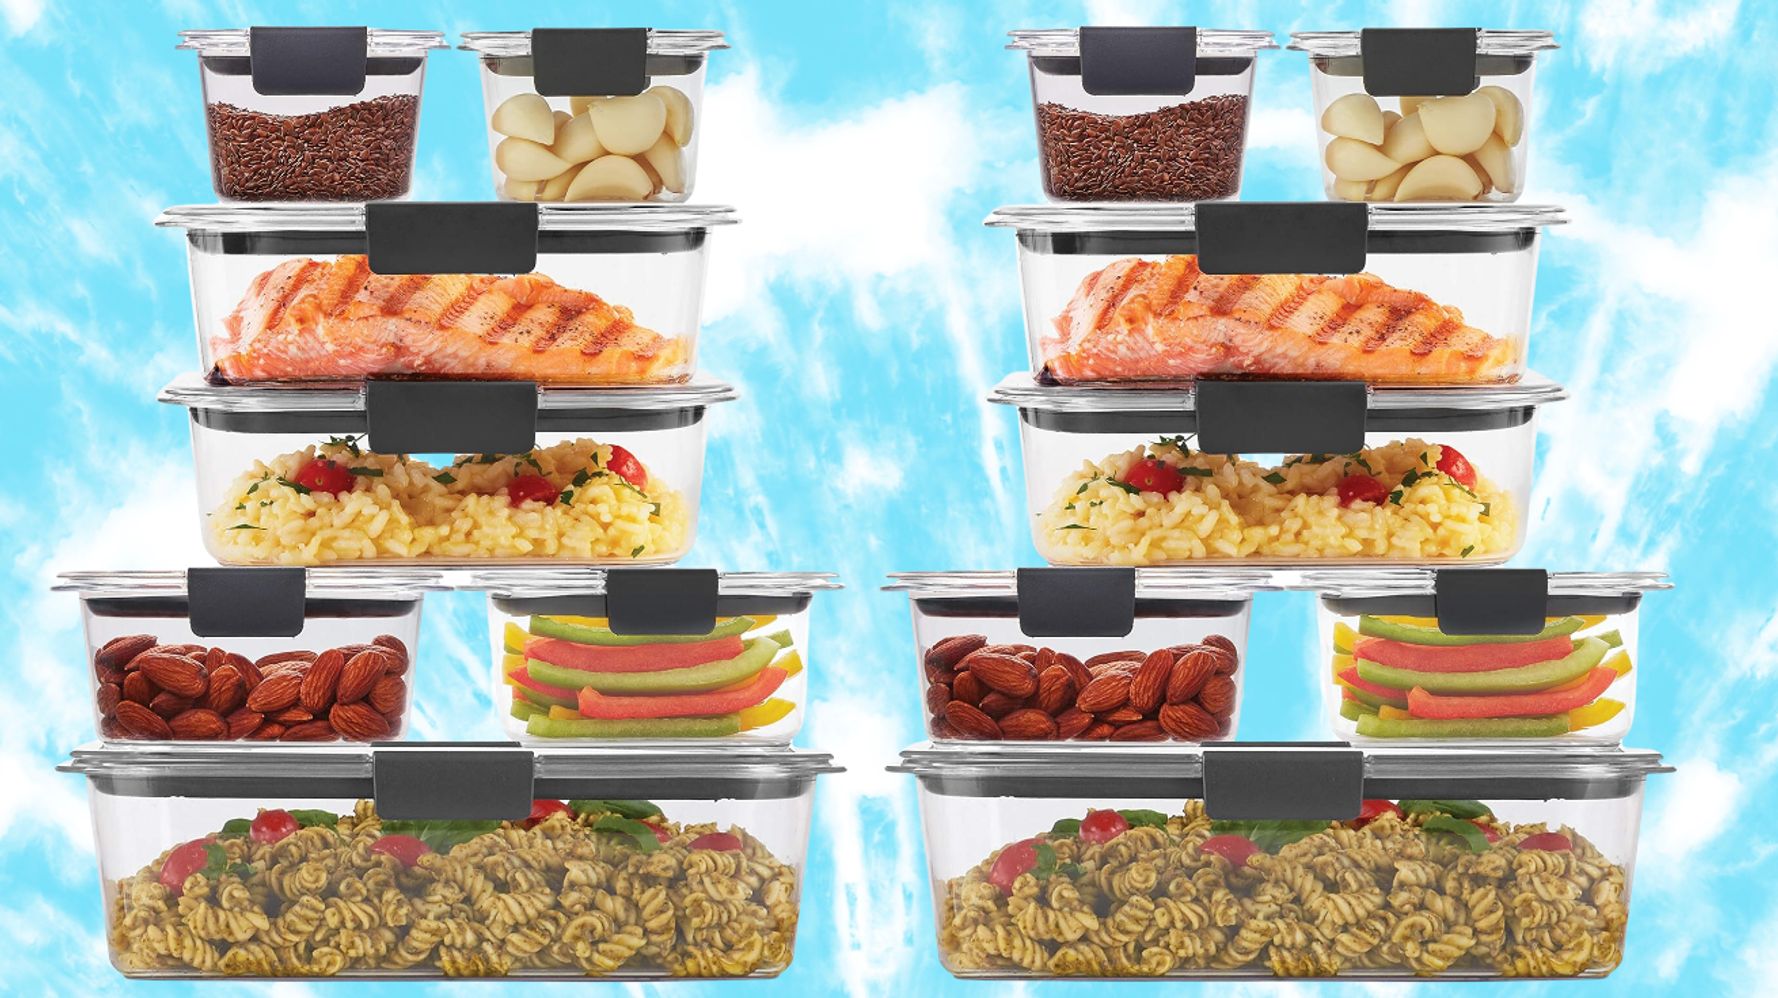 Rubbermaid Food Container Set Is 20% Off On